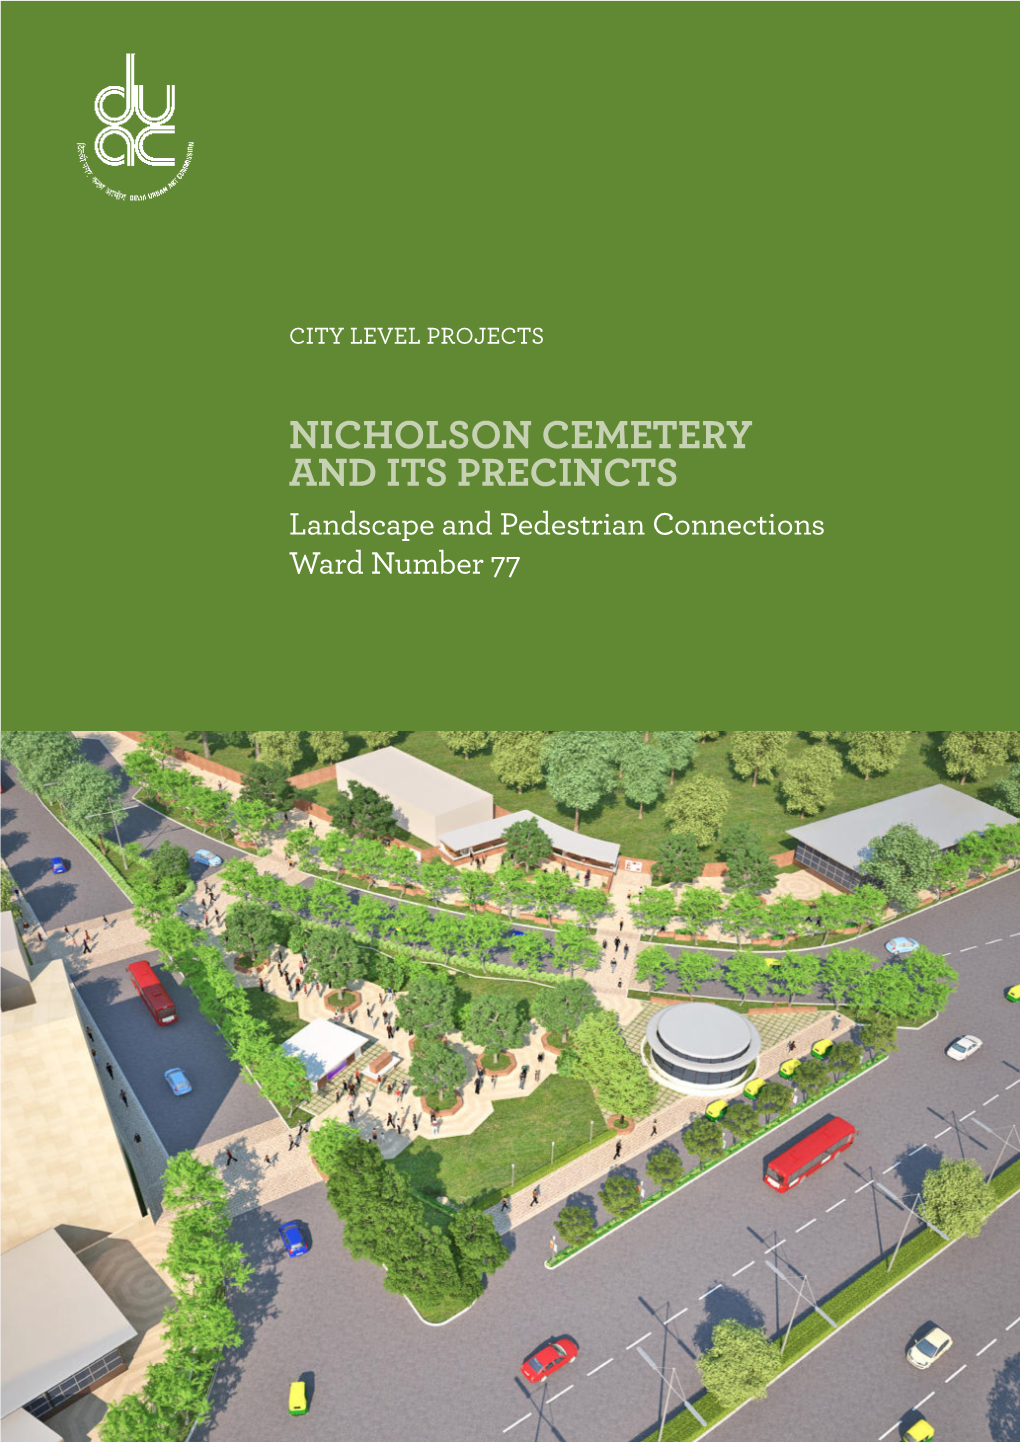 NICHOLSON CEMETERY and ITS PRECINCTS Landscape and Pedestrian Connections Ward Number 77